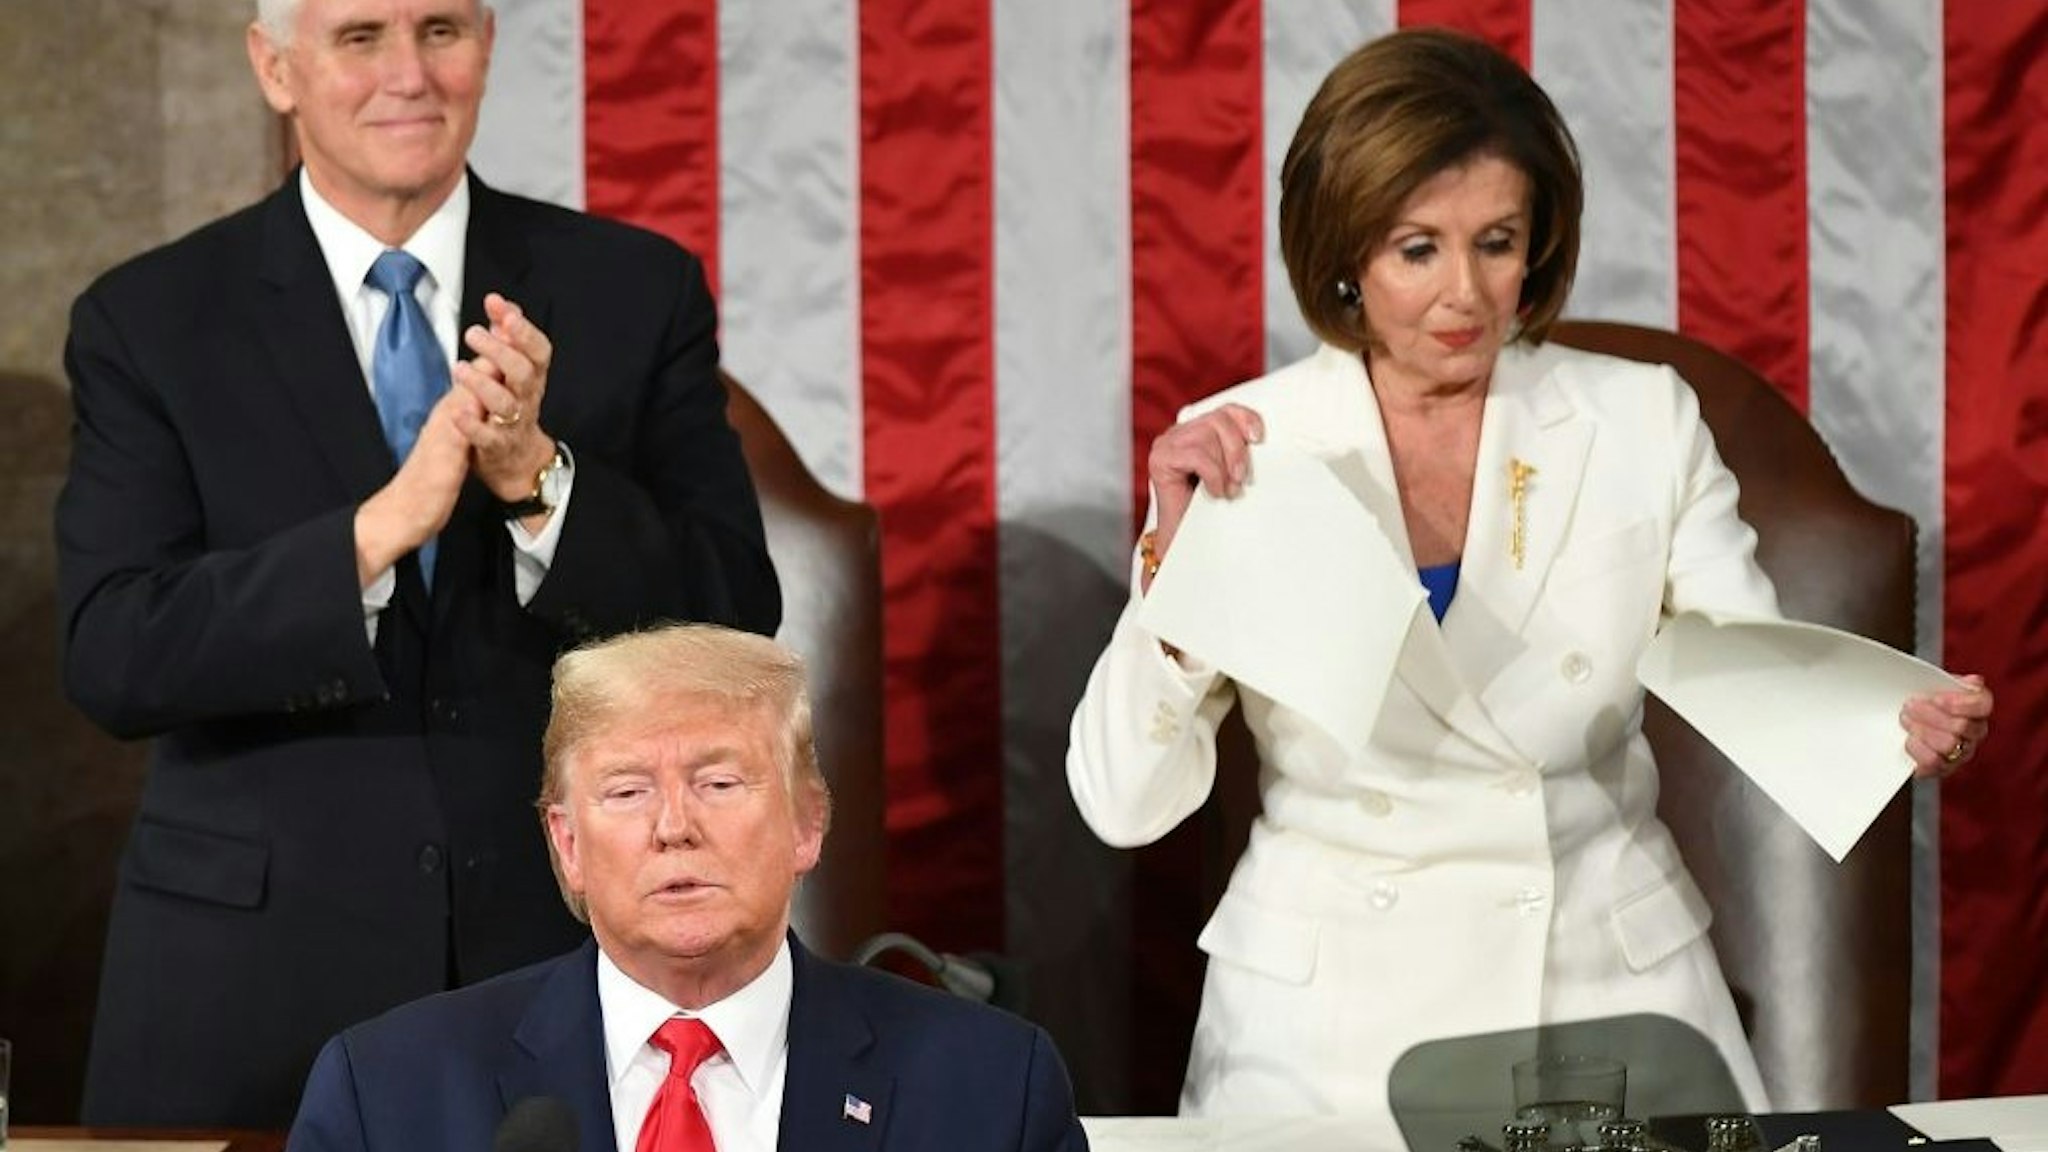 TOPSHOT - US Vice President Mike Pence claps as Speaker of the US House of Representatives Nancy Pelosi appears to rip a copy of US President Donald Trumps speech after he delivers the State of the Union address at the US Capitol in Washington, DC, on February 4, 2020. (Photo by MANDEL NGAN / AFP) (Photo by